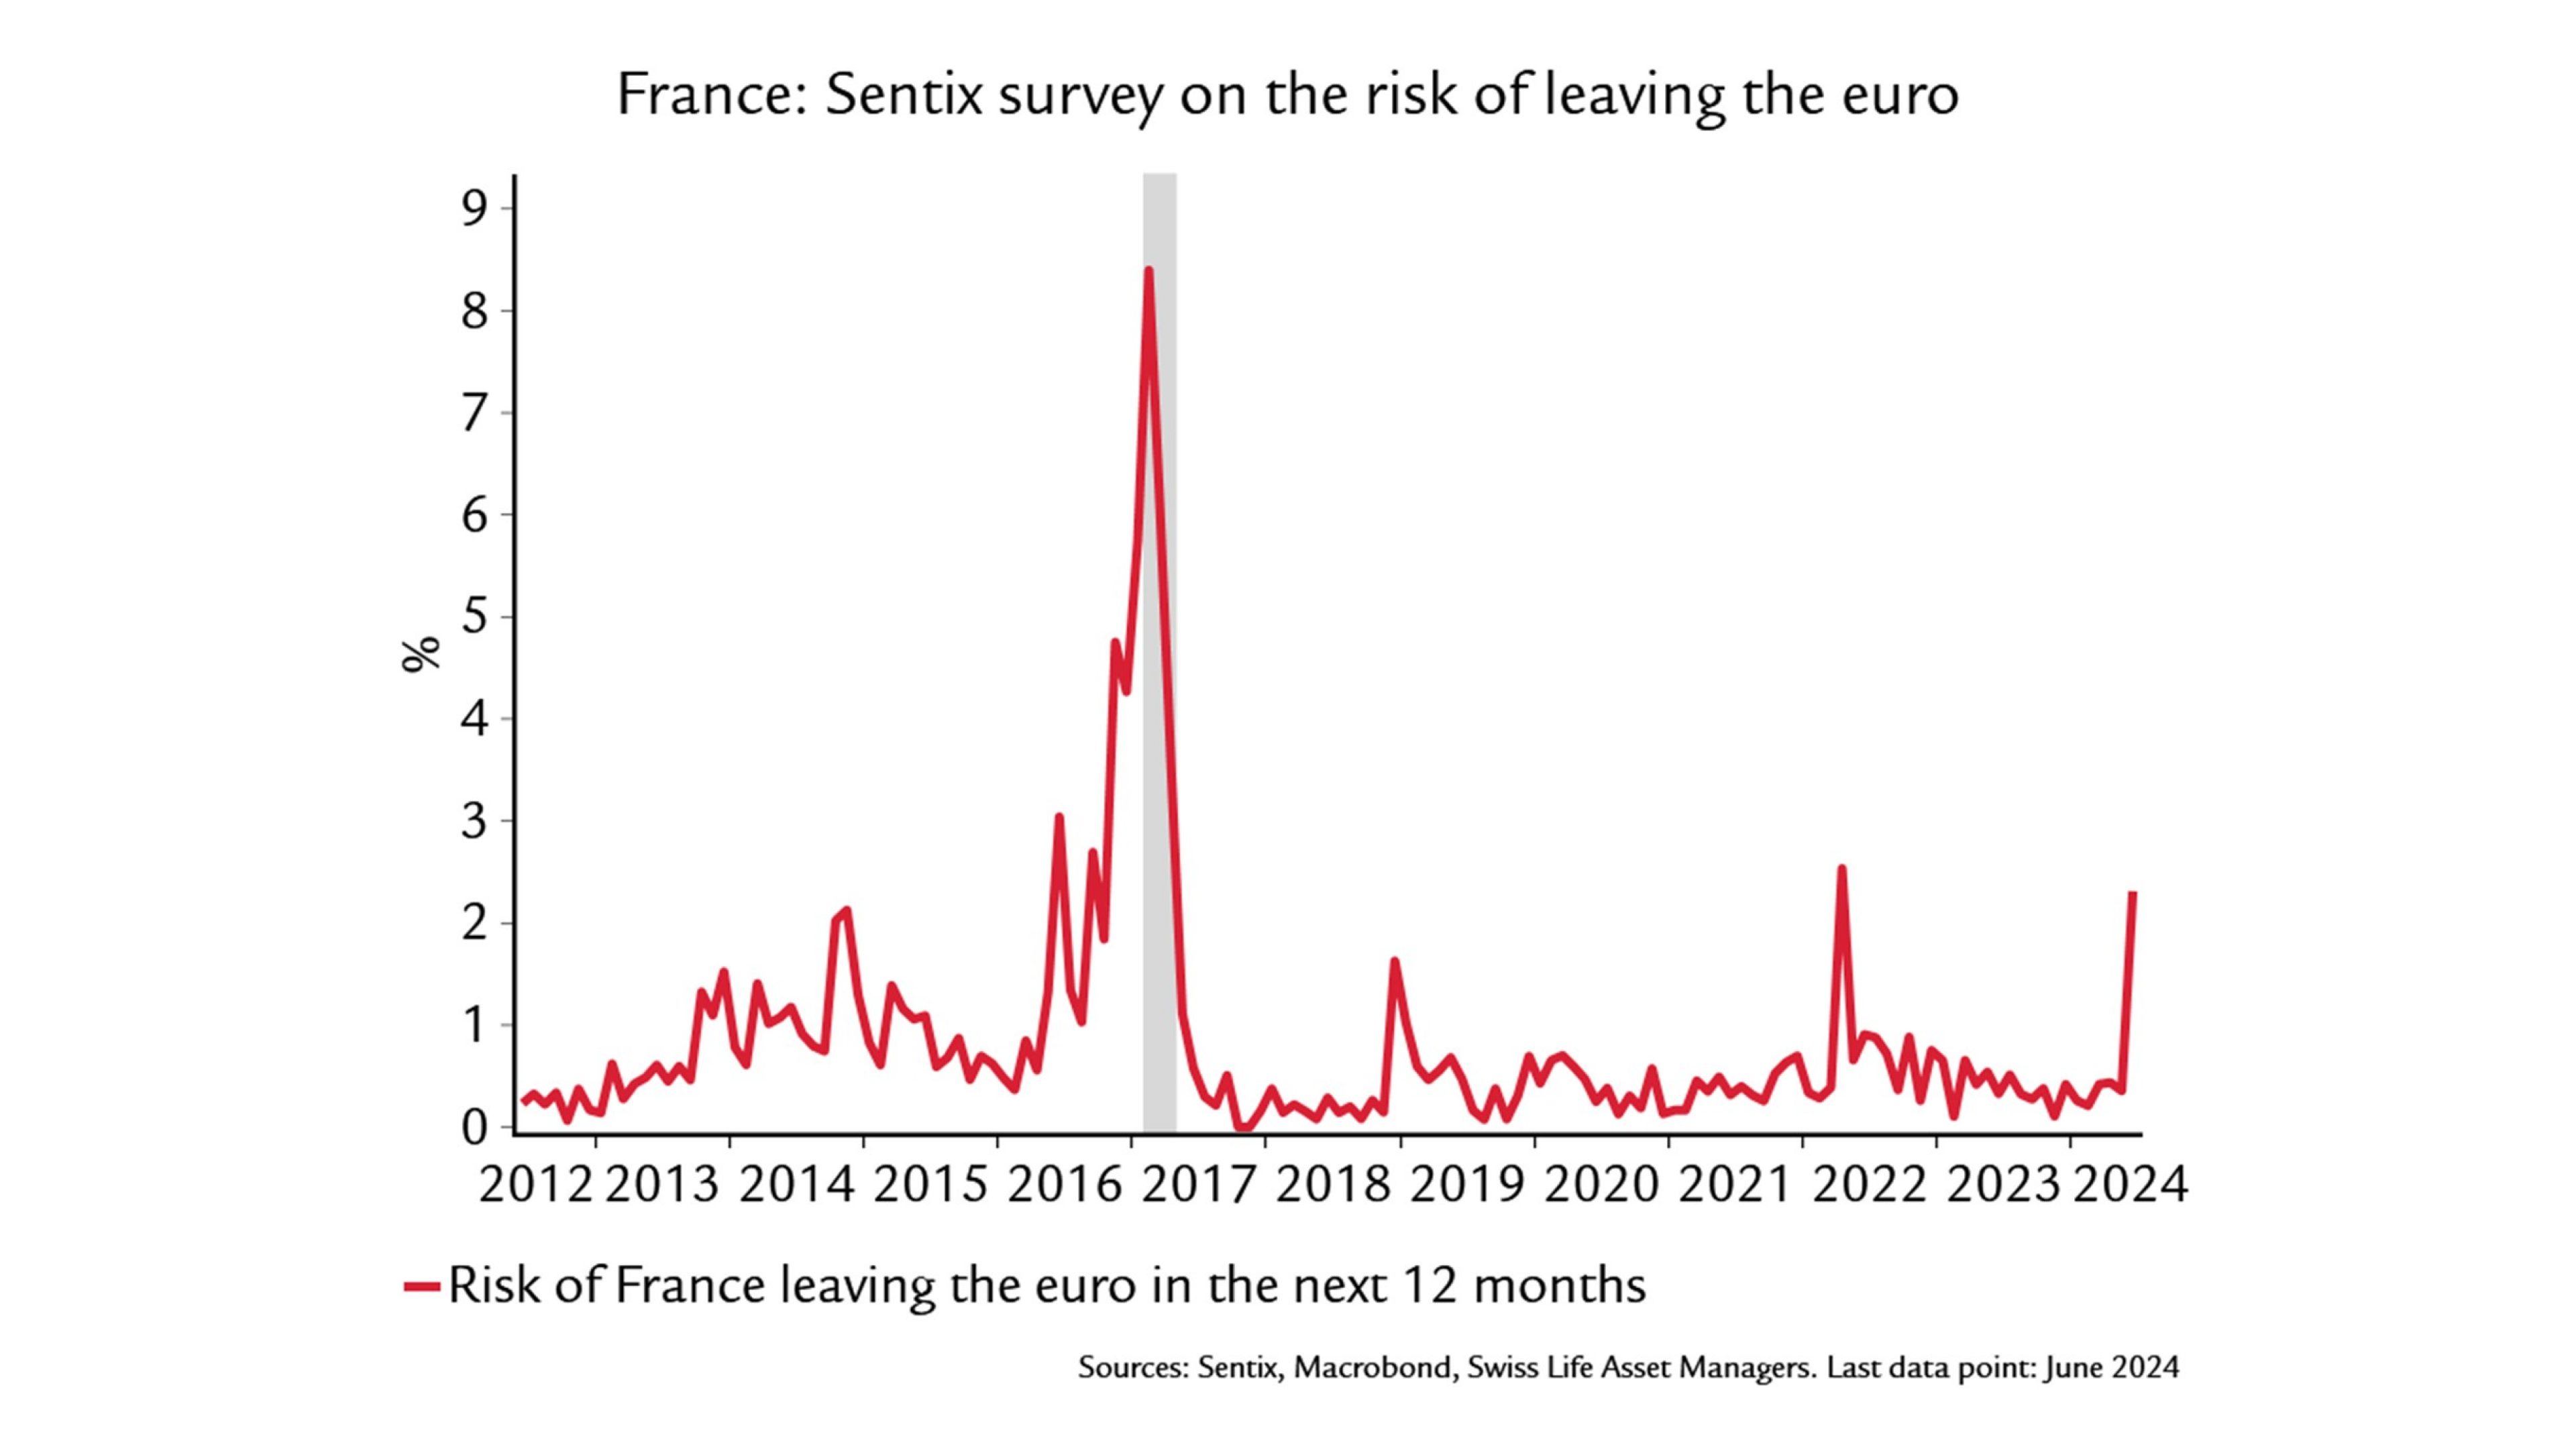 graphic shows Sentix survey on the risk of france leaving the euro 